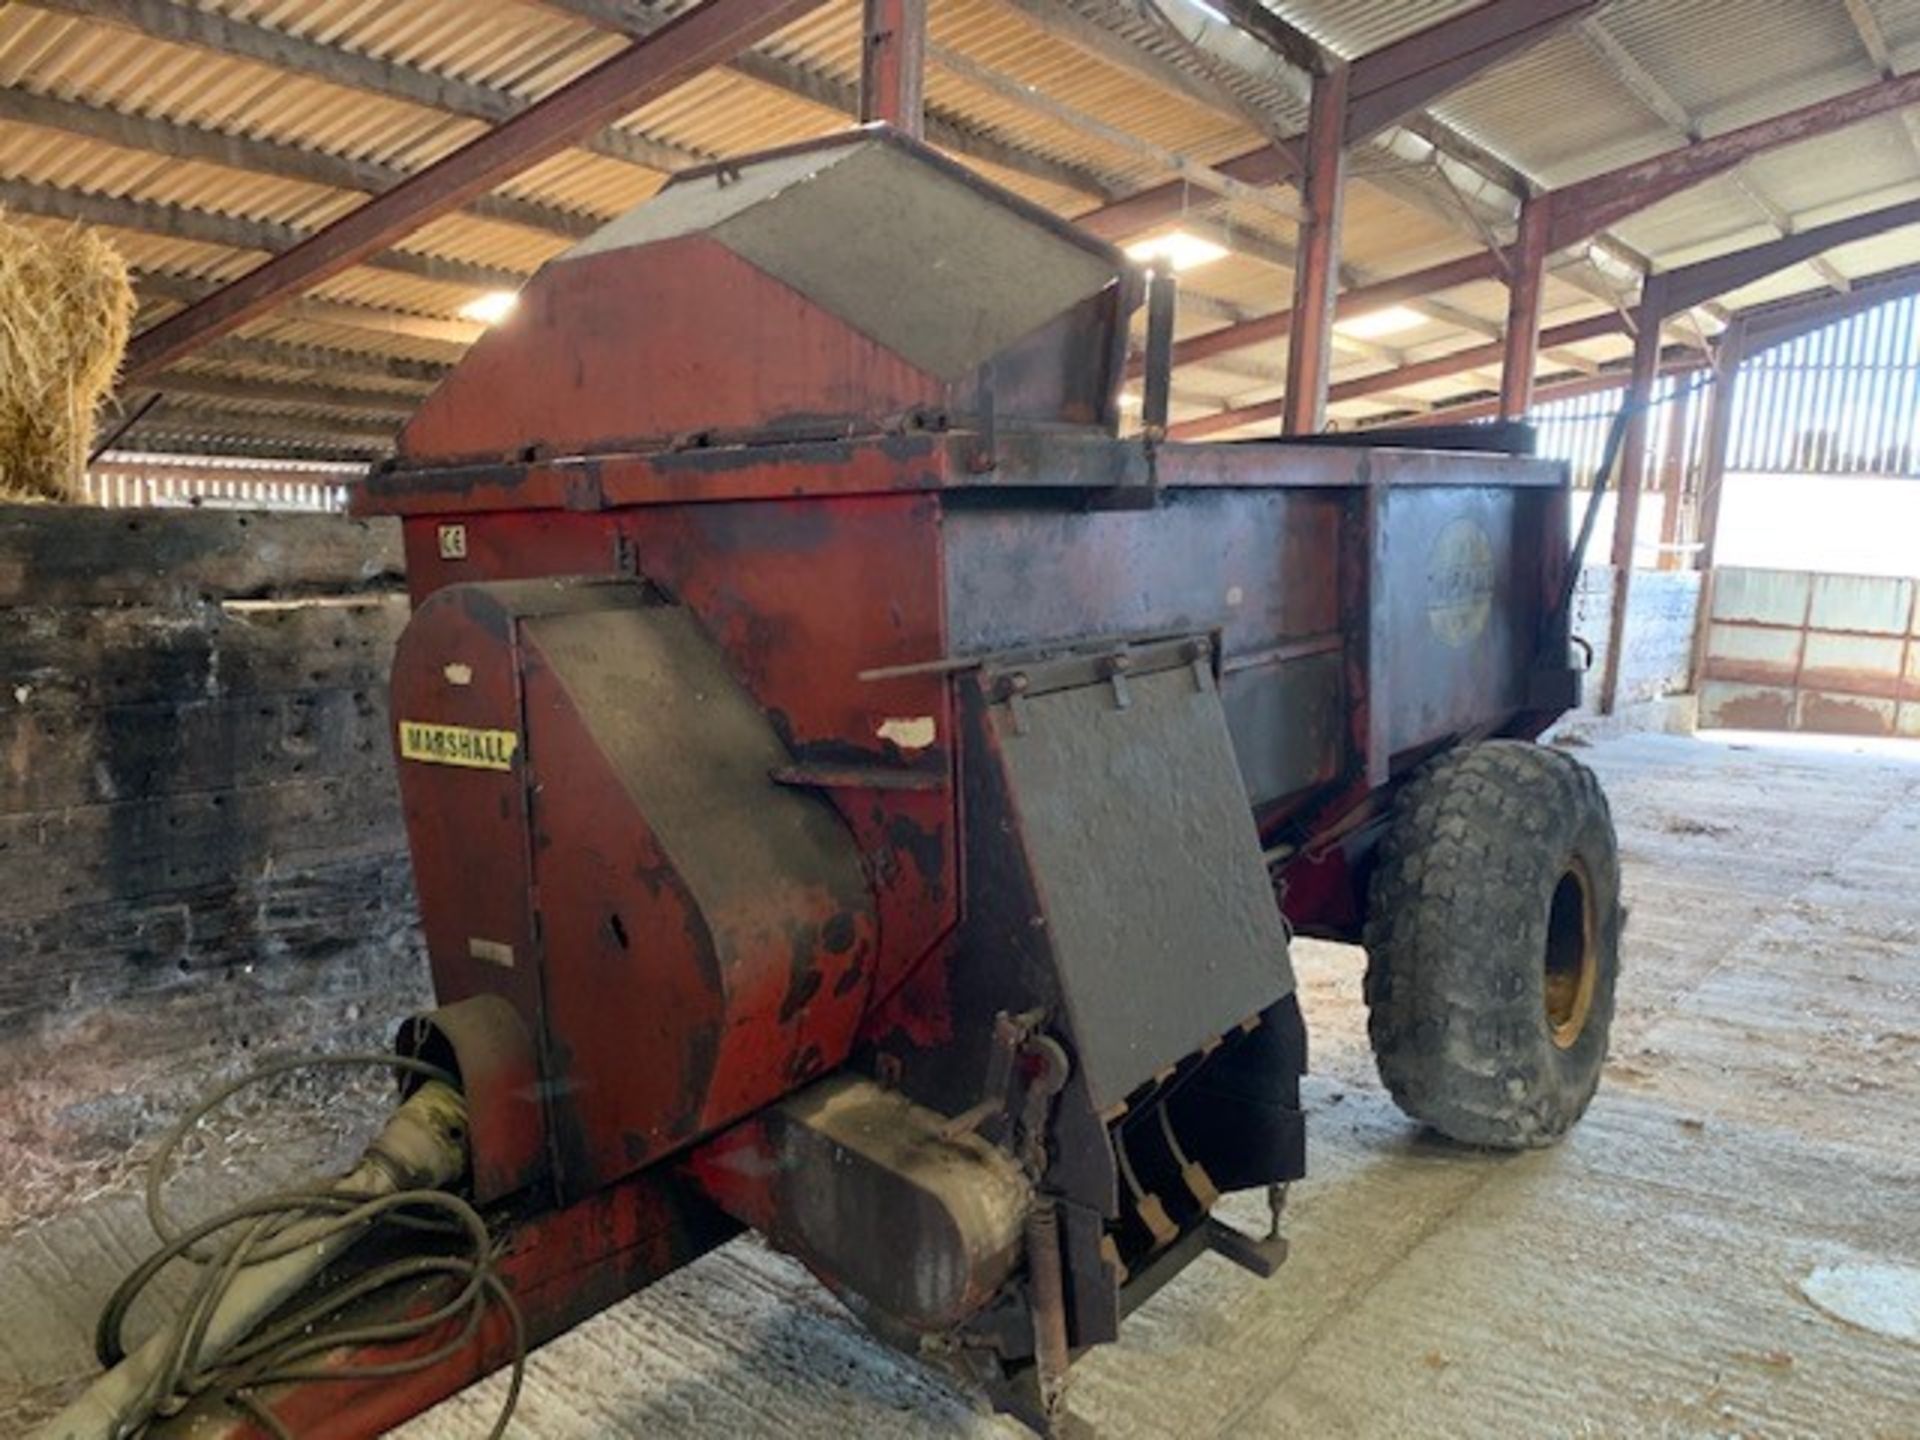 1996 MARSHALL 850 MUCK SPREADER by kind permission